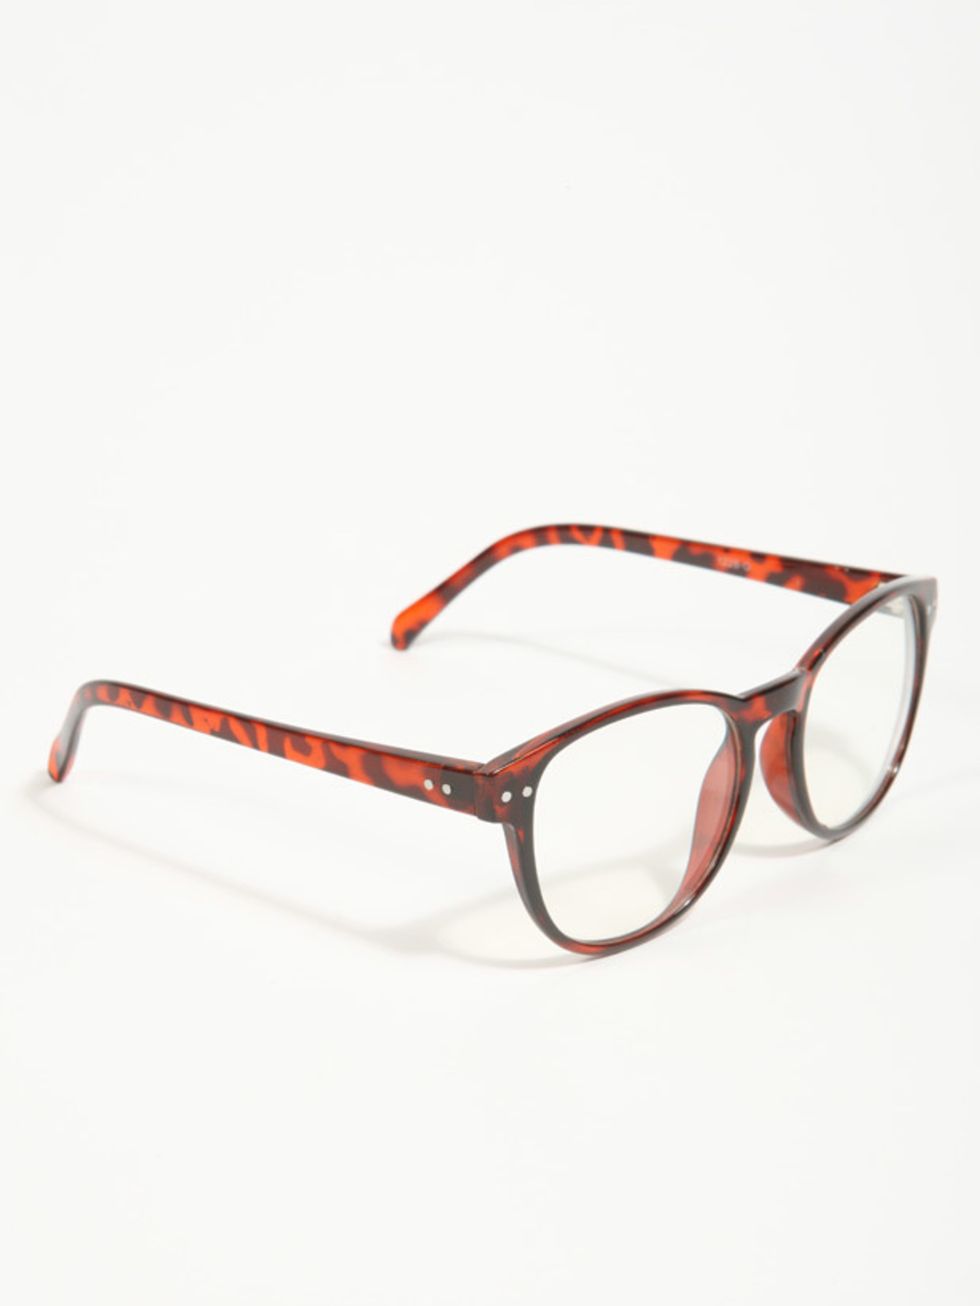 <p>Tortoiseshell round glasses, £16, by <a href="http://www.urbanoutfitters.co.uk/Double-Stud-Frame-Readers/invt/5758411051220&amp;bklist=icat,5,shop,womens,womensaccessories,wsunglasses">Urban Outfitters</a></p>